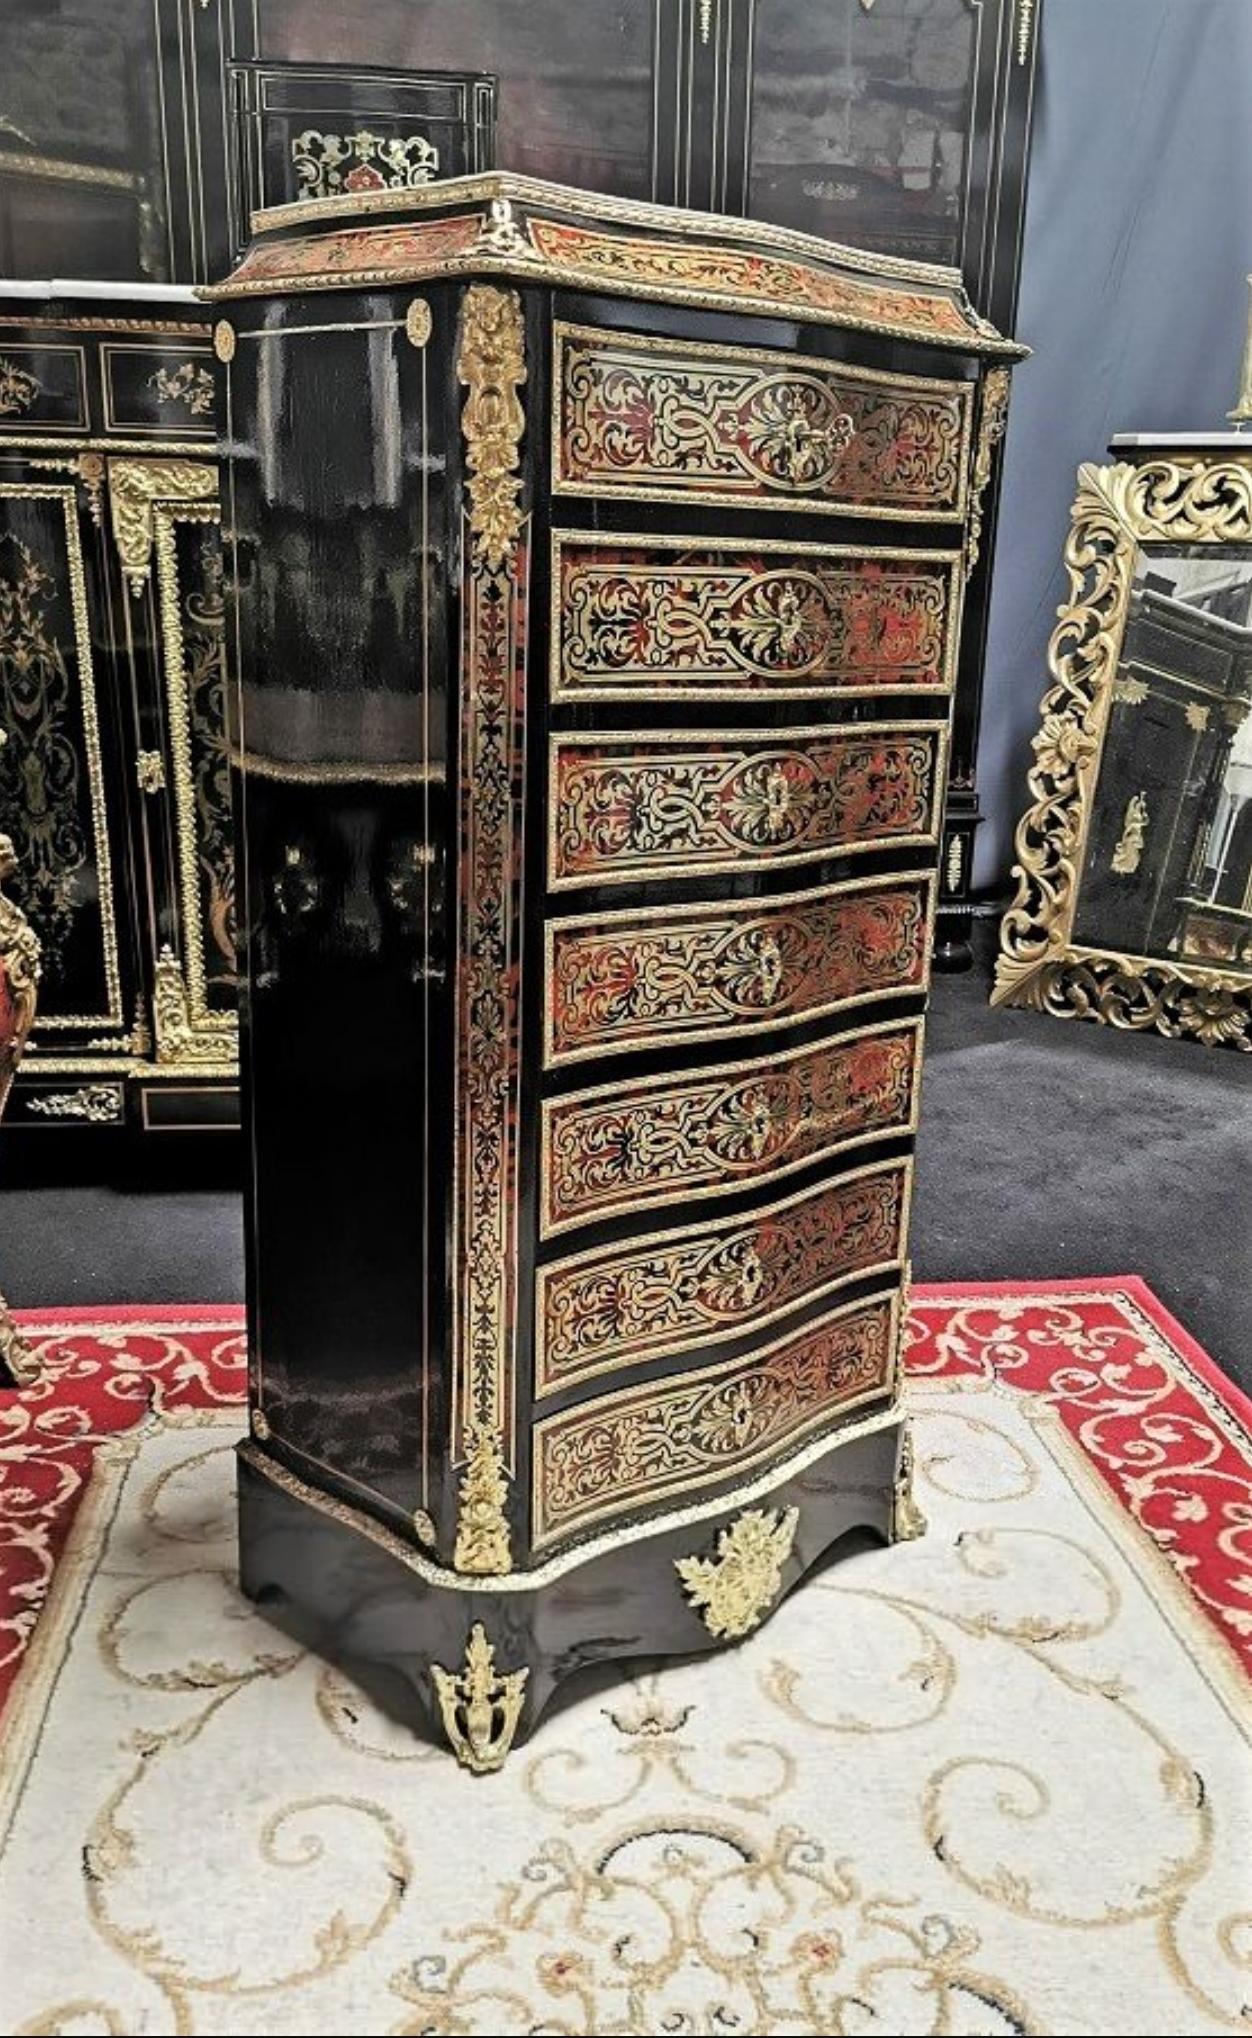 Stunning Napoleon III secretary in Boulle tortoiseshell marquetry and brass, patterned with interlacing, scrolls and foliage. Treated in false week-end, with 4 drawers and a flap simulating 3 drawers. Theater with 3 drawers, two small and one large.